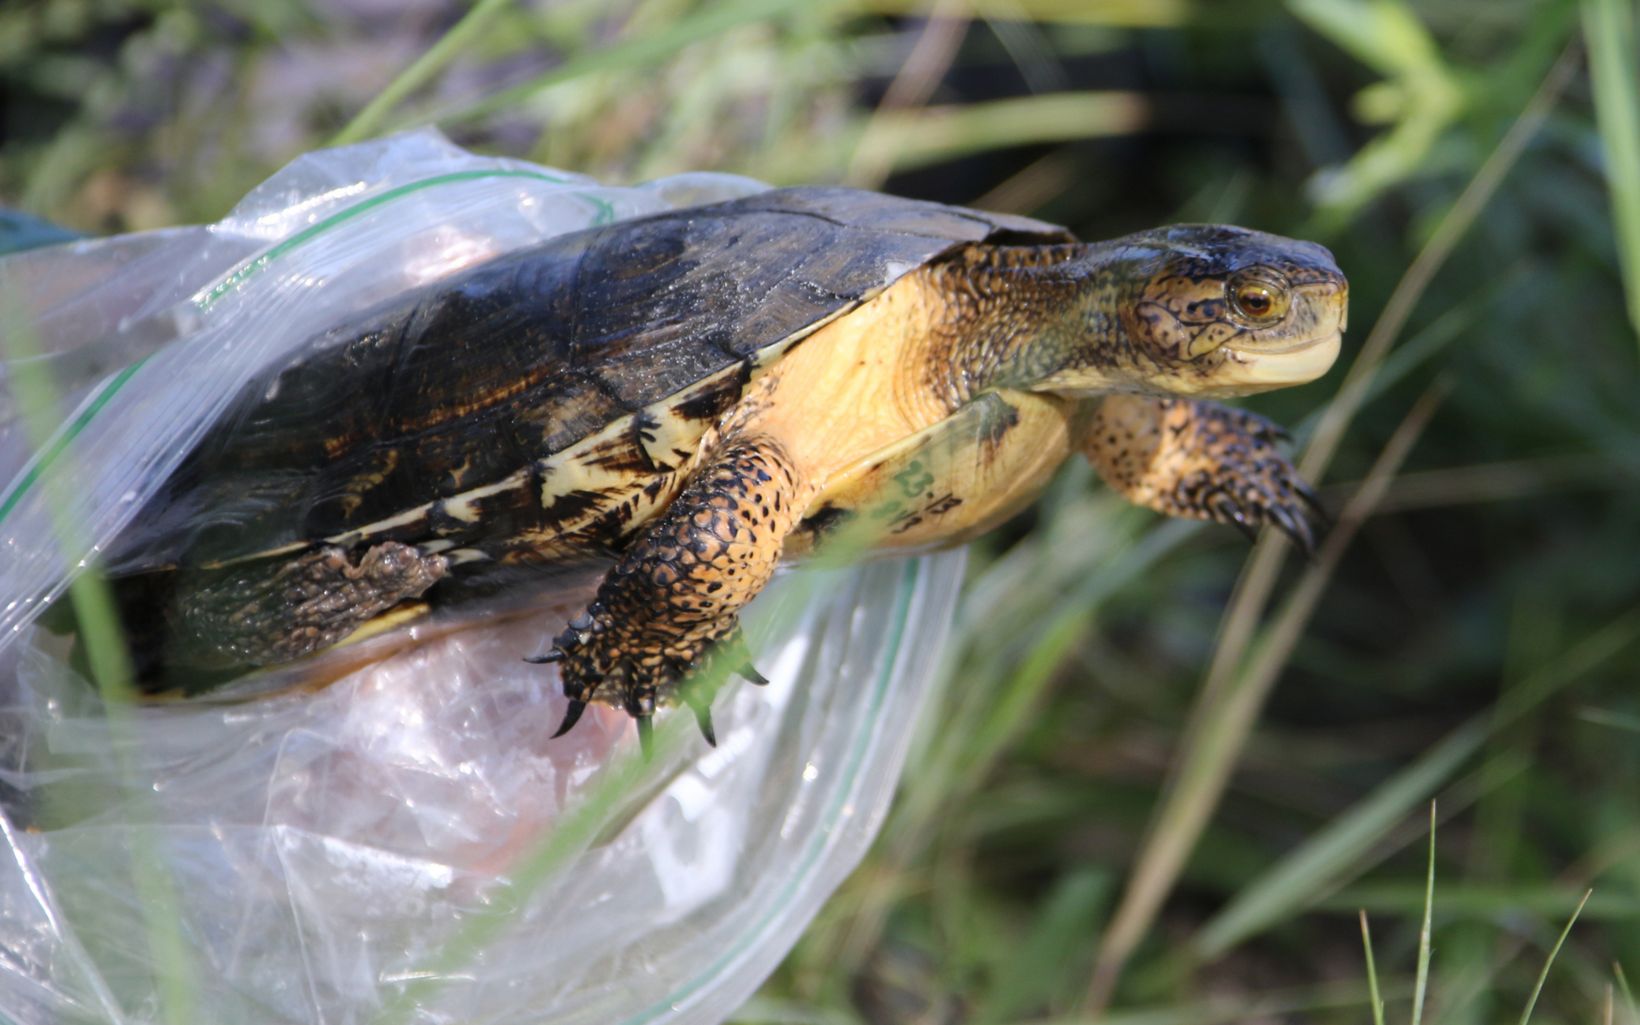 Closeup of a turtle with its hind end in a plastic bag being held by a researcher.